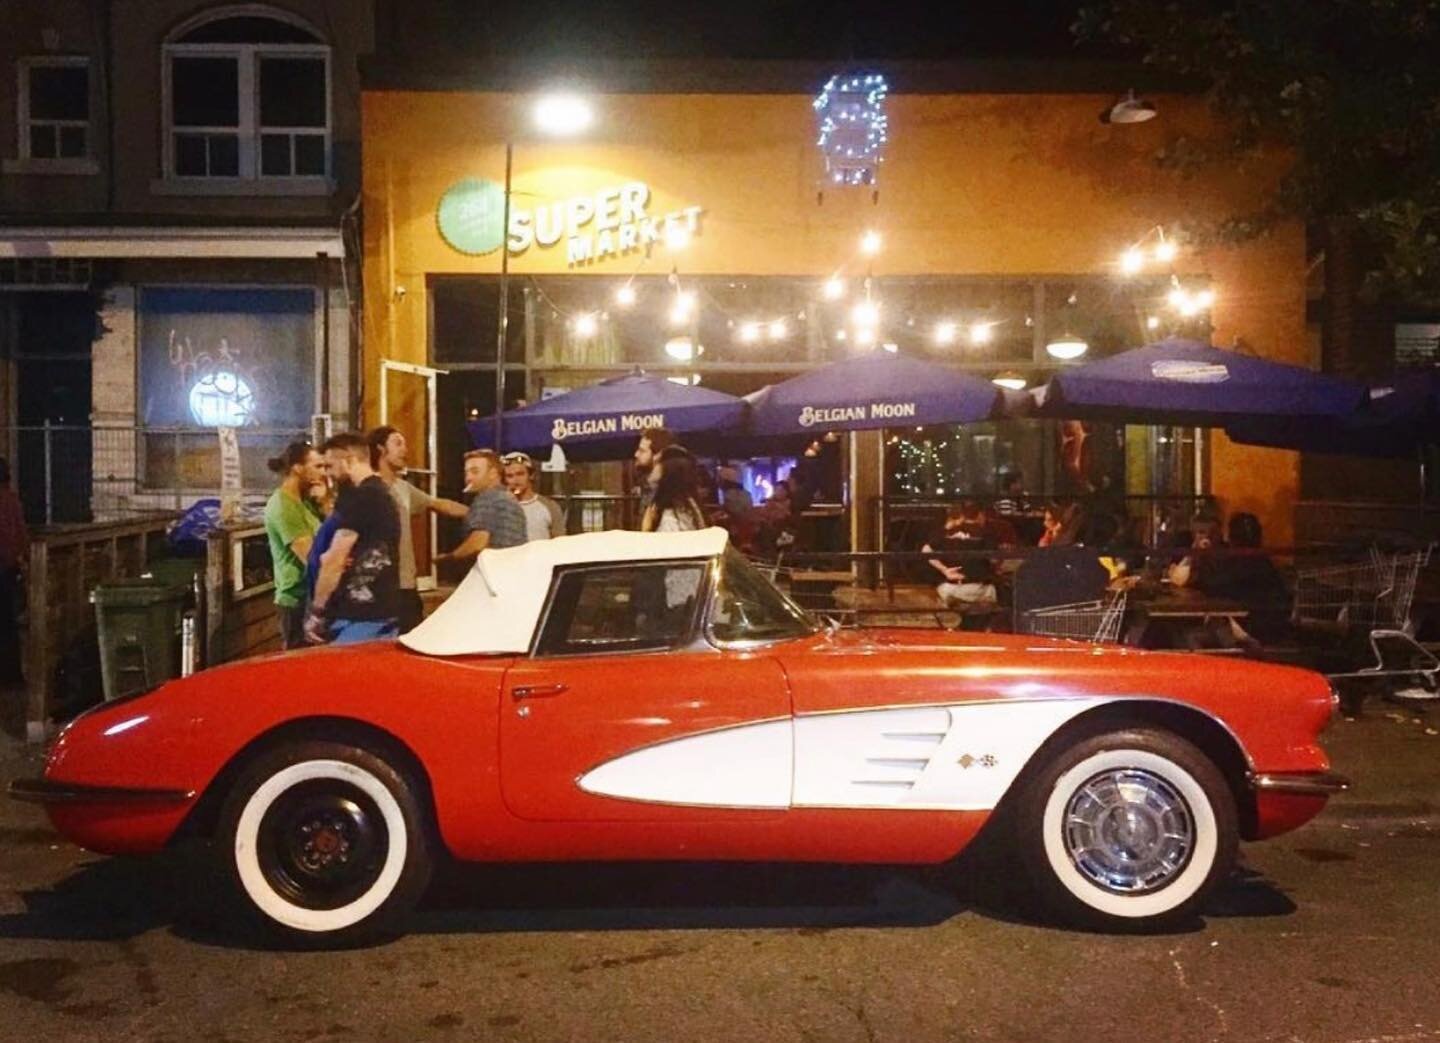 🚗💥 Throwback to this sweet ride parked outside of the Supermarket!

Pop by the market tonight for our Drinkin' N' Thinkin' trivia! 7:30PM-10:30PM!

📸: @augustaandbaldwin
.
.
.
#torontocars #vintagecar #vintagecars #torontocars #torontobar #toronto